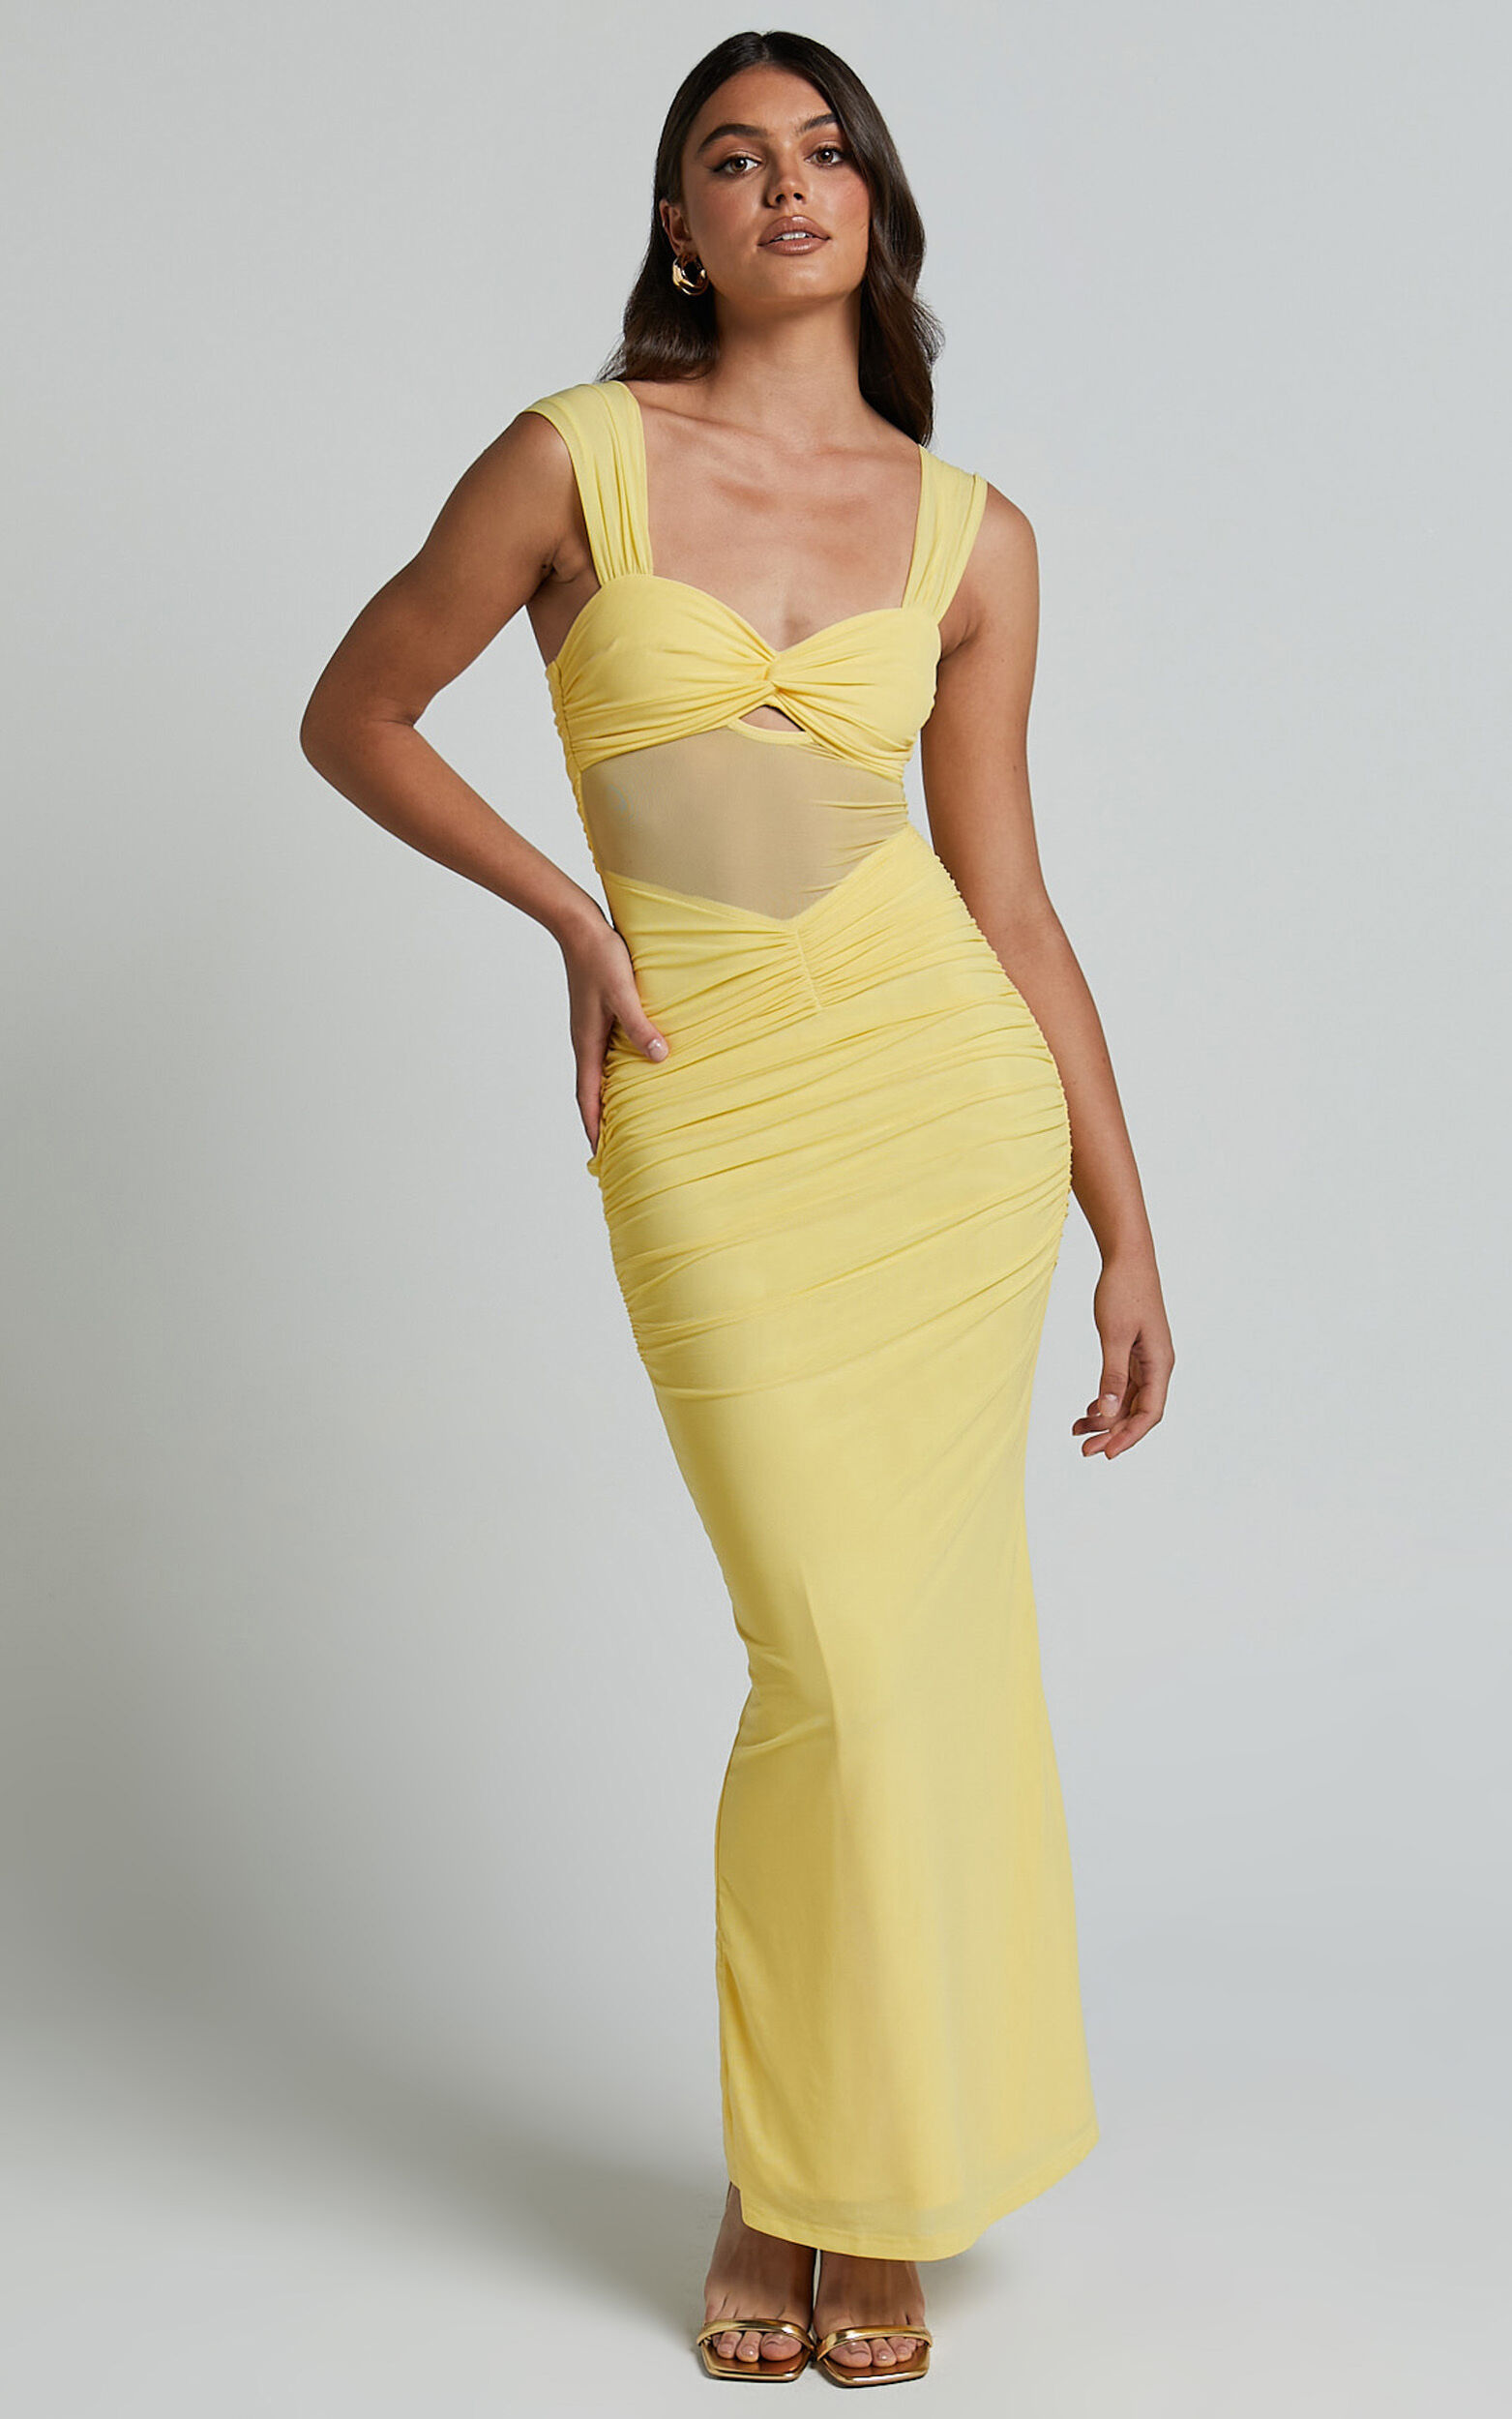 Adalee Midi Dress- Sheer Panel Ruched Bust Dress in Yellow - 06, YEL1